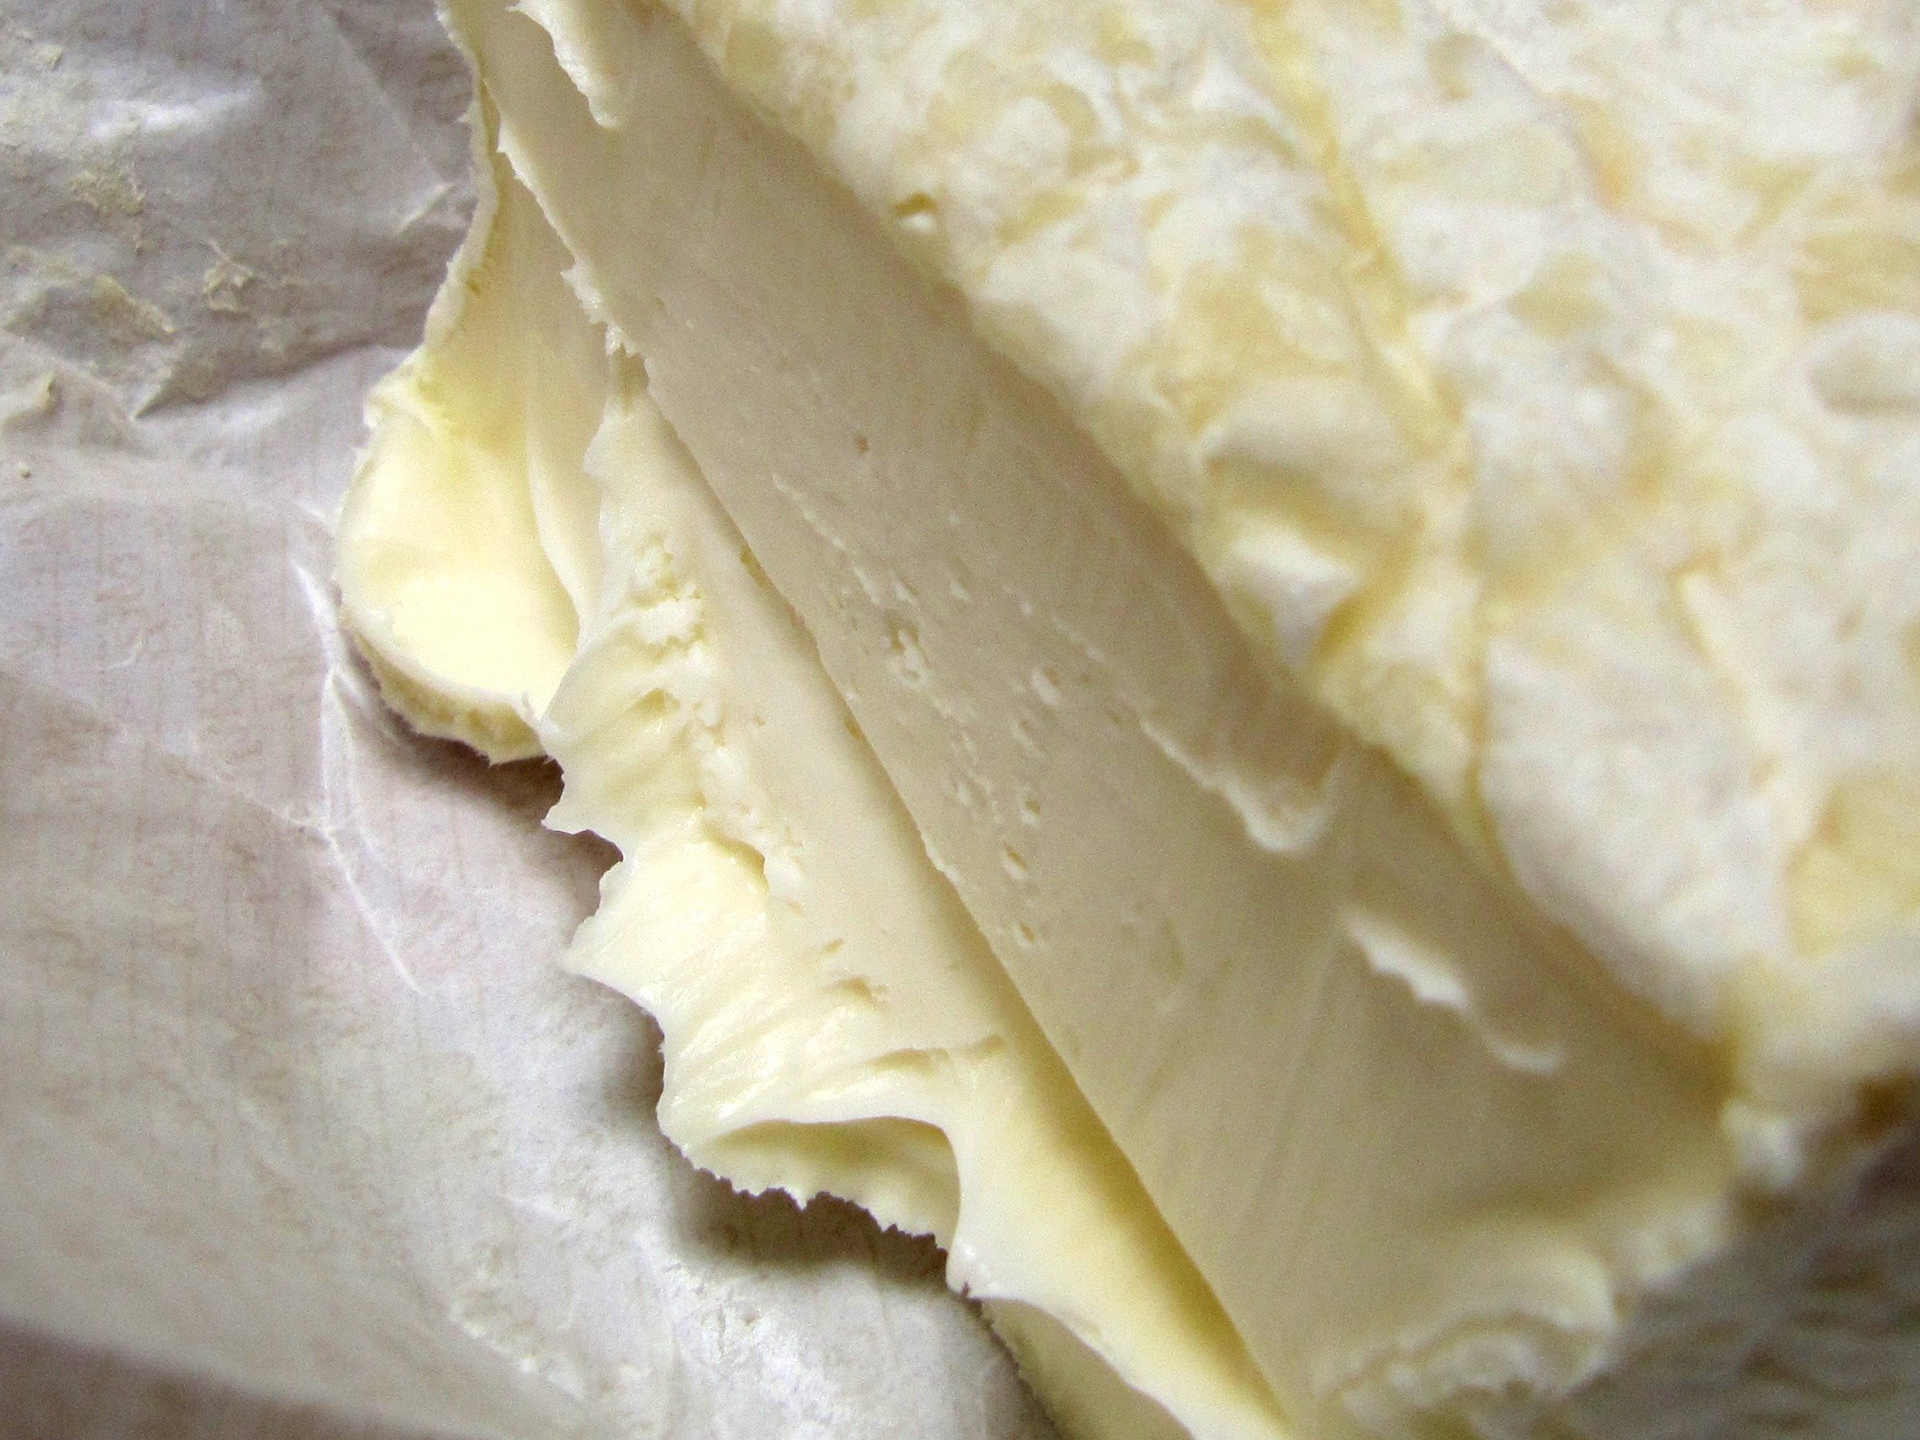 "Cheese=fromage" Photo by frenchy CC BY 2.0